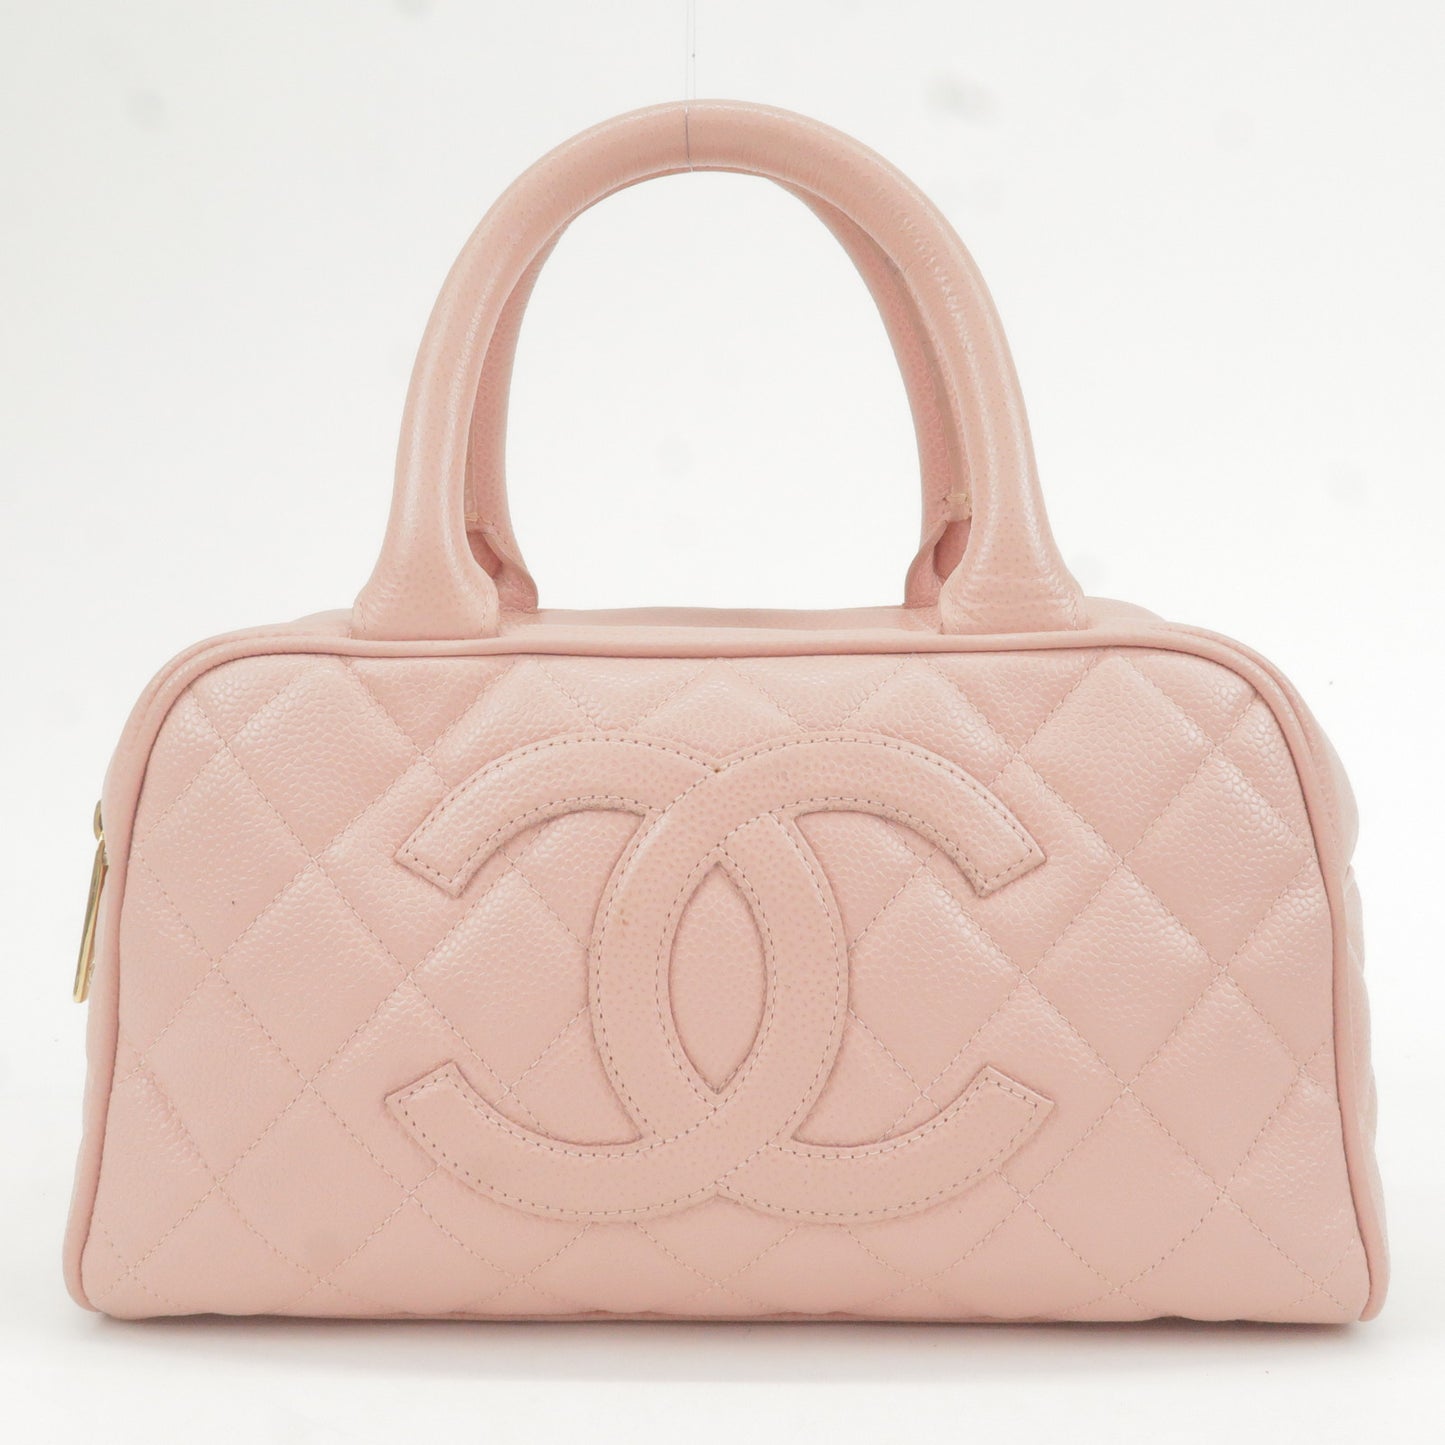 Chanel Vintage - Caviar Deauville Bowling Bag - Pink - Leather